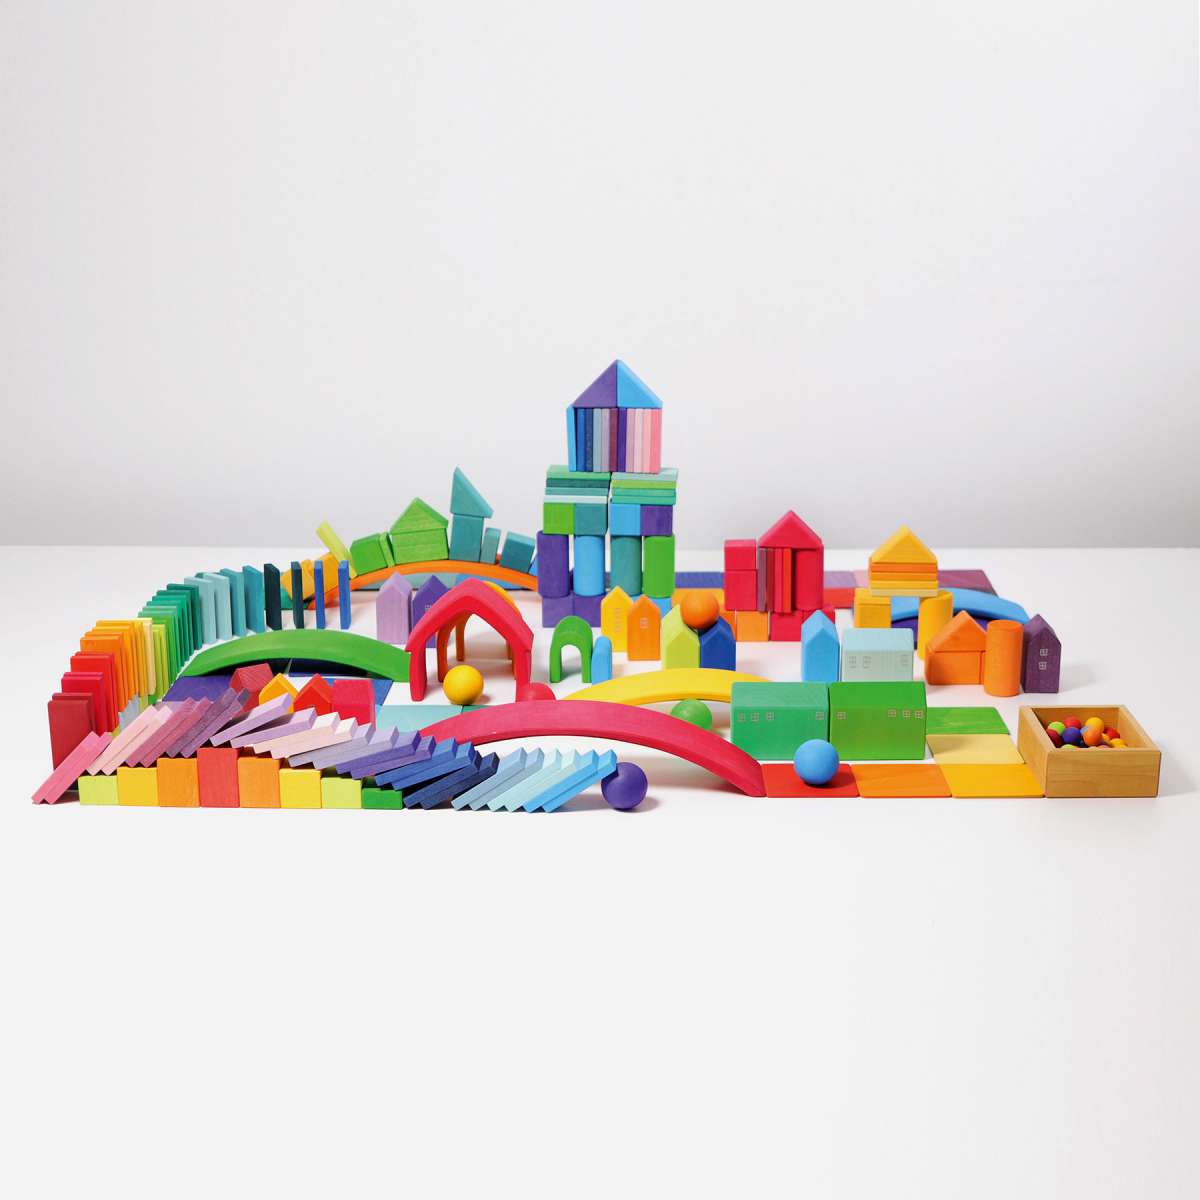 Color Charts Rally set with rainbow blocks, balls, and rollers